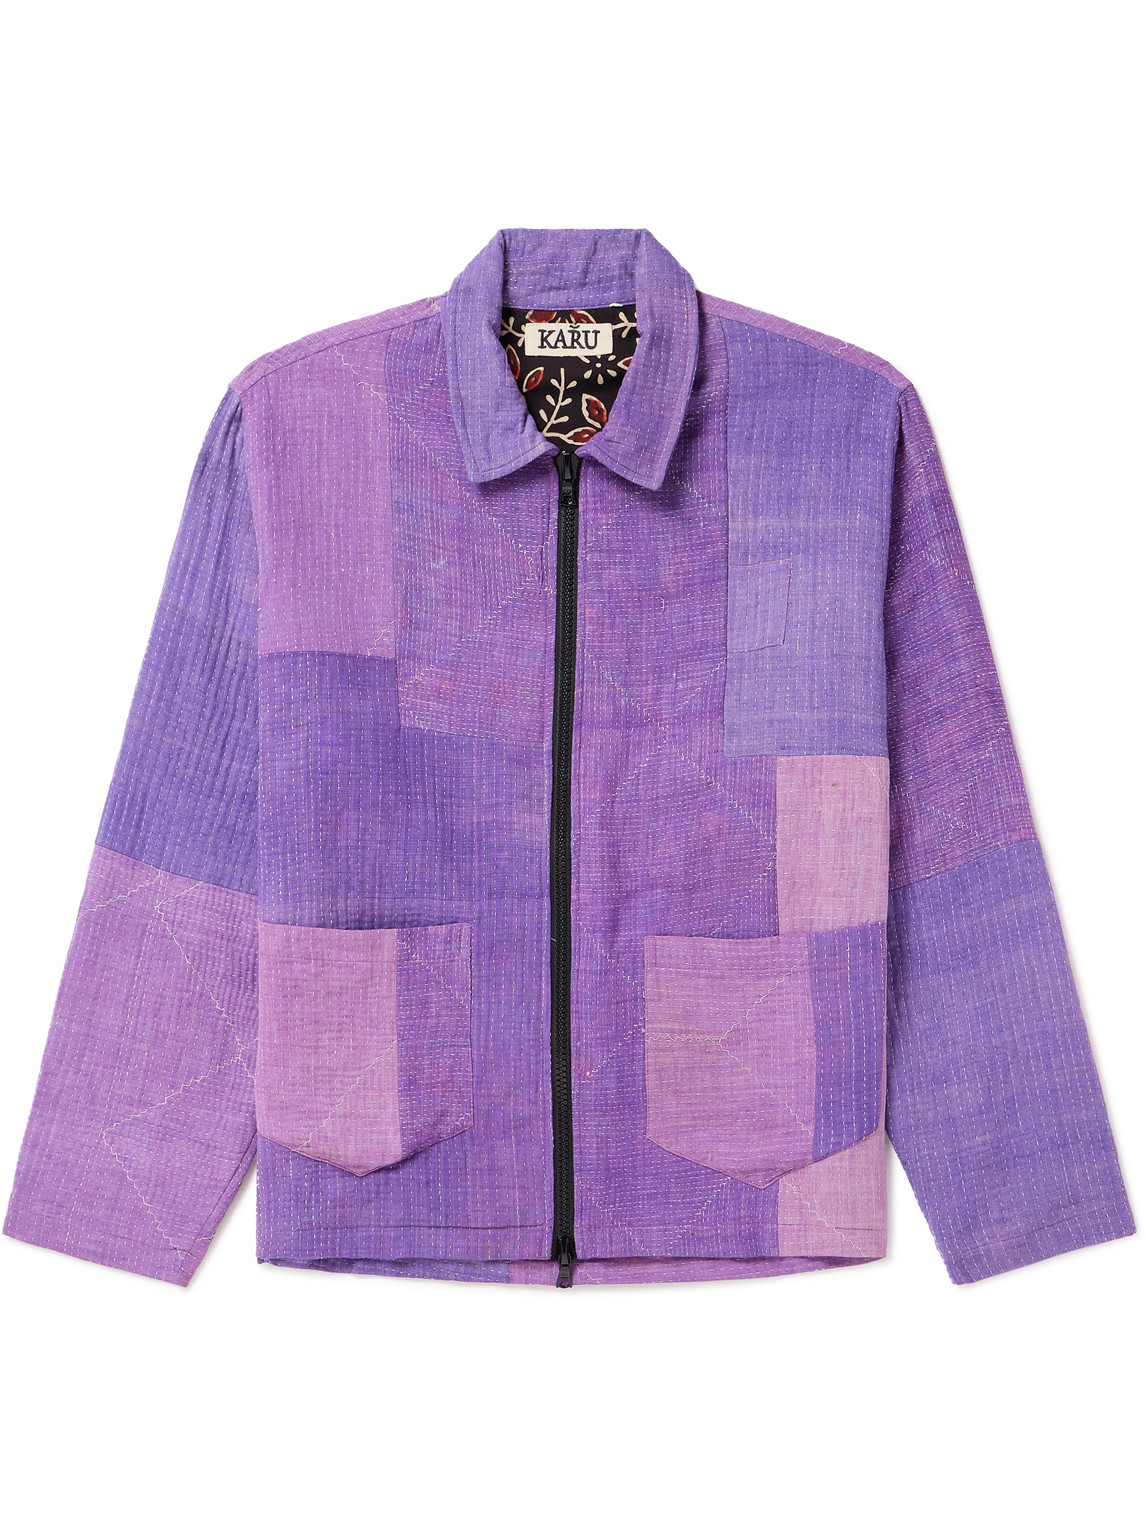 Karu Research Throwing Fits Patchwork Embroidered Cotton Jacket In Purple